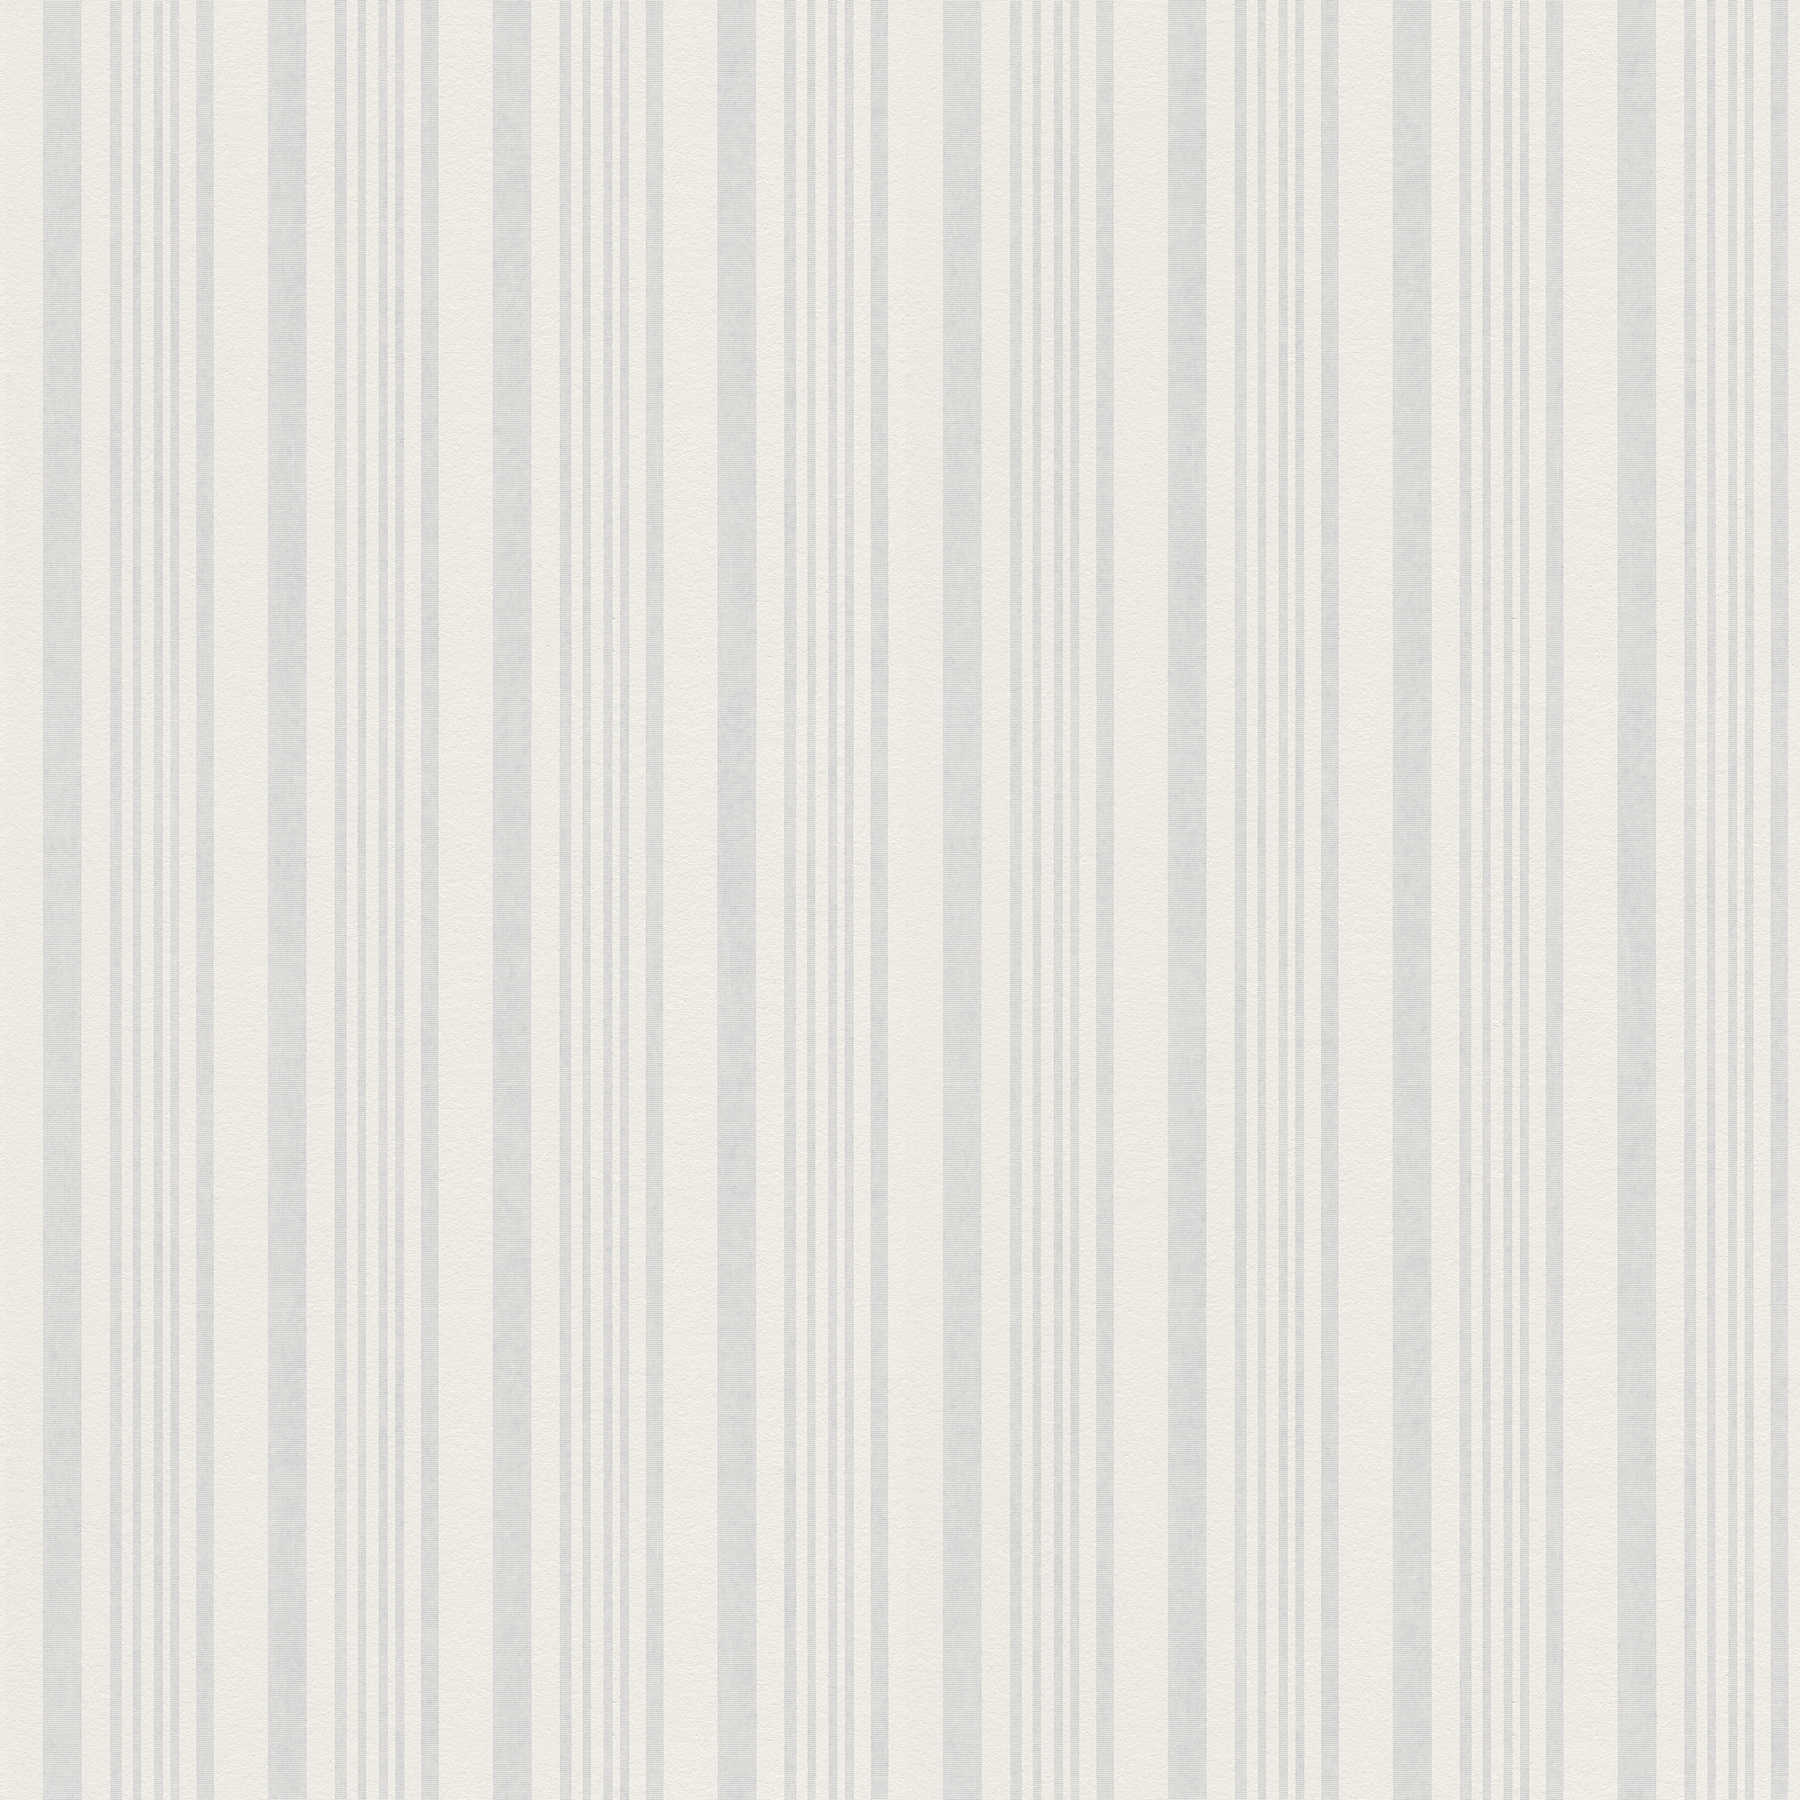 Paintable non-woven wallpaper with line pattern & texture effect - white
